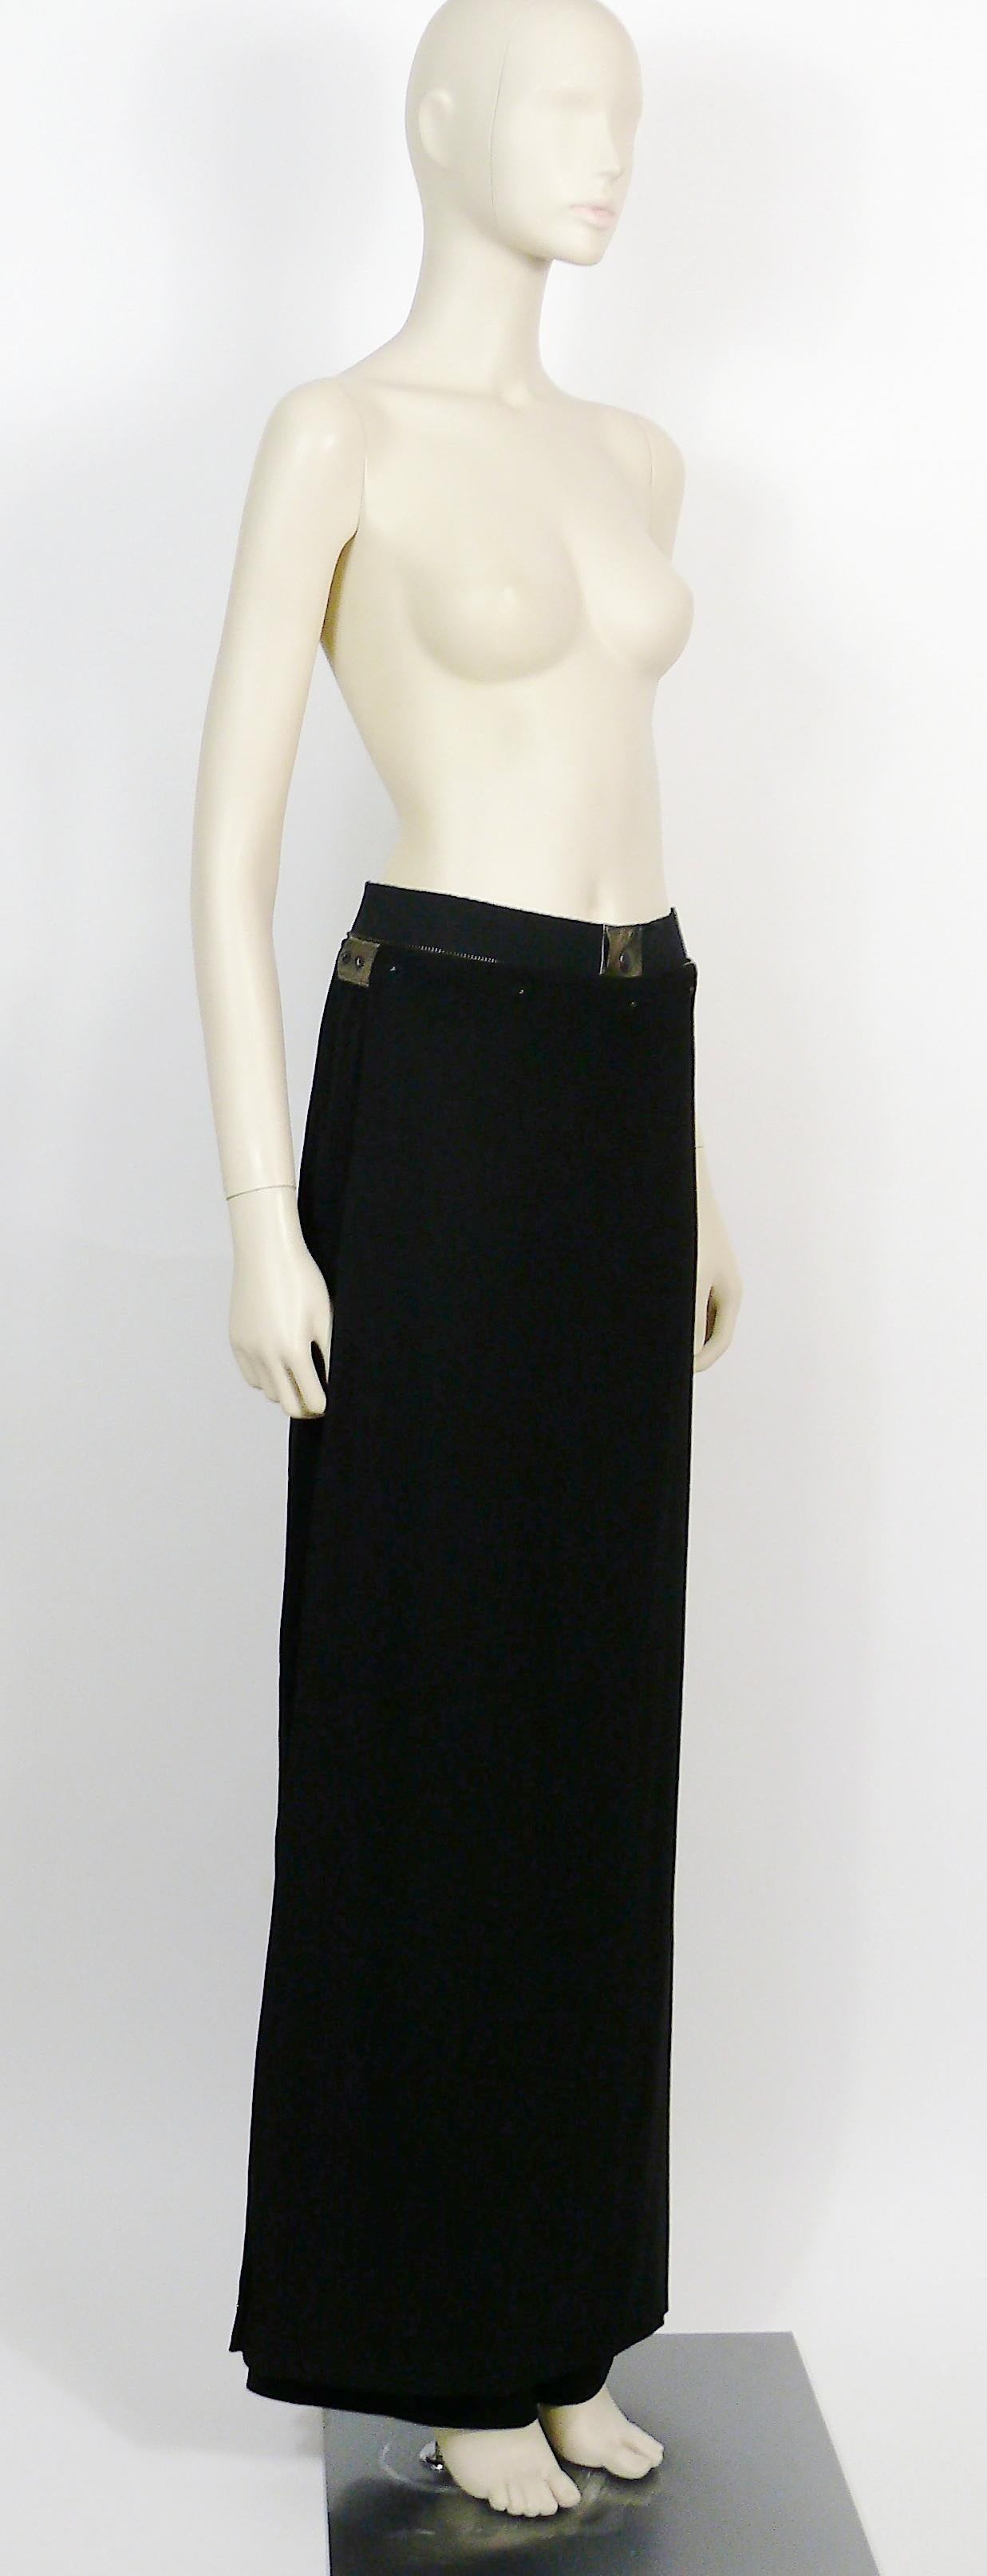 JEAN PAUL GAULTIER HOMME vintage rare black wool blend wrap skirt trousers for men.

These trousers feature :
- Black virgin wool blend trousers with a wrap skirt/apron.
- Wide elasticated waist band embellished with a half zipper.
- Front snap